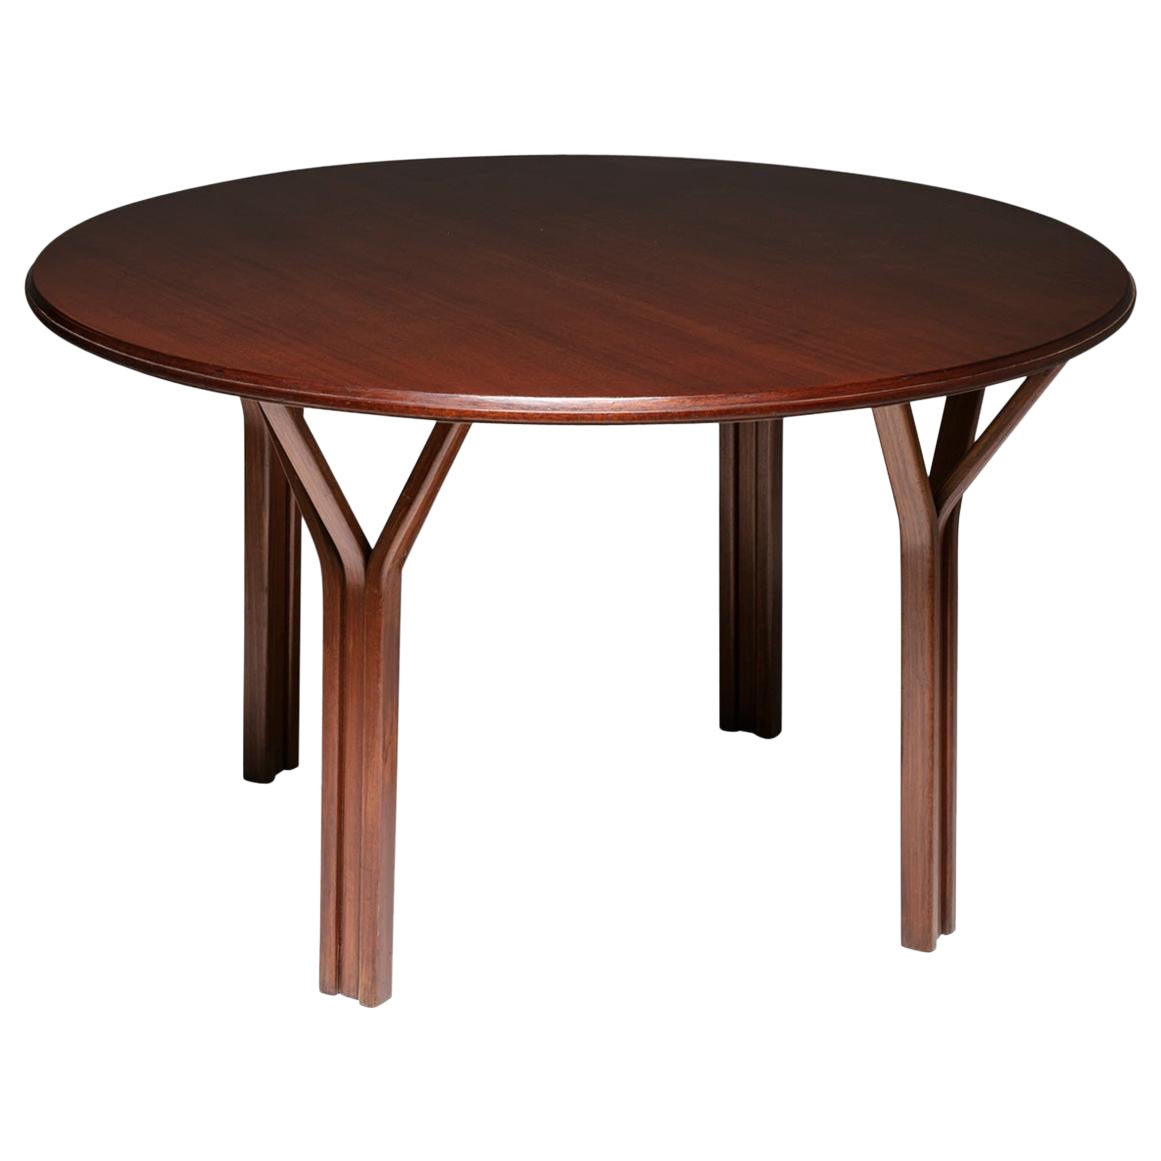 Round  Wood Table by Gregotti, Meneghetti, Stoppino for SIM, Italy, 1950s For Sale